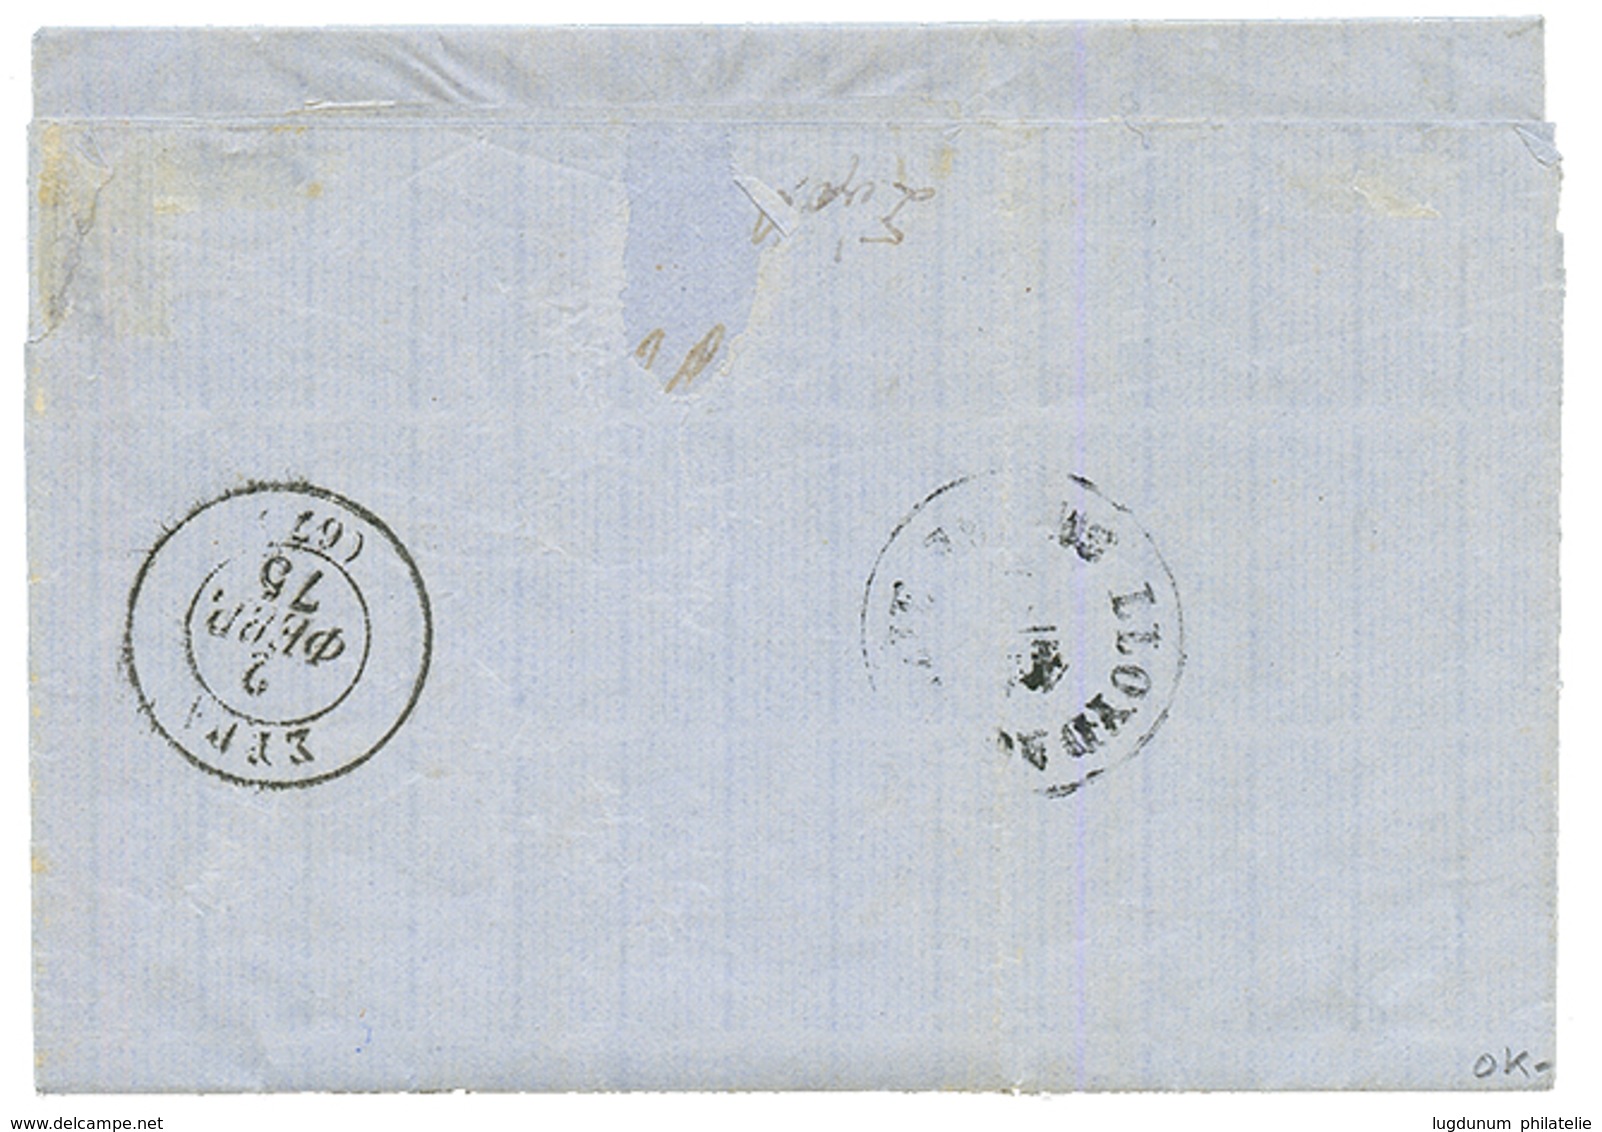 GREECE : 1875 10 SOLDI Canc. RHODUS + GRECE Pair 10l (1 Stamp Cut) Canc. 67 On Entire Letter To SYRA. MIXT Franking From - Eastern Austria